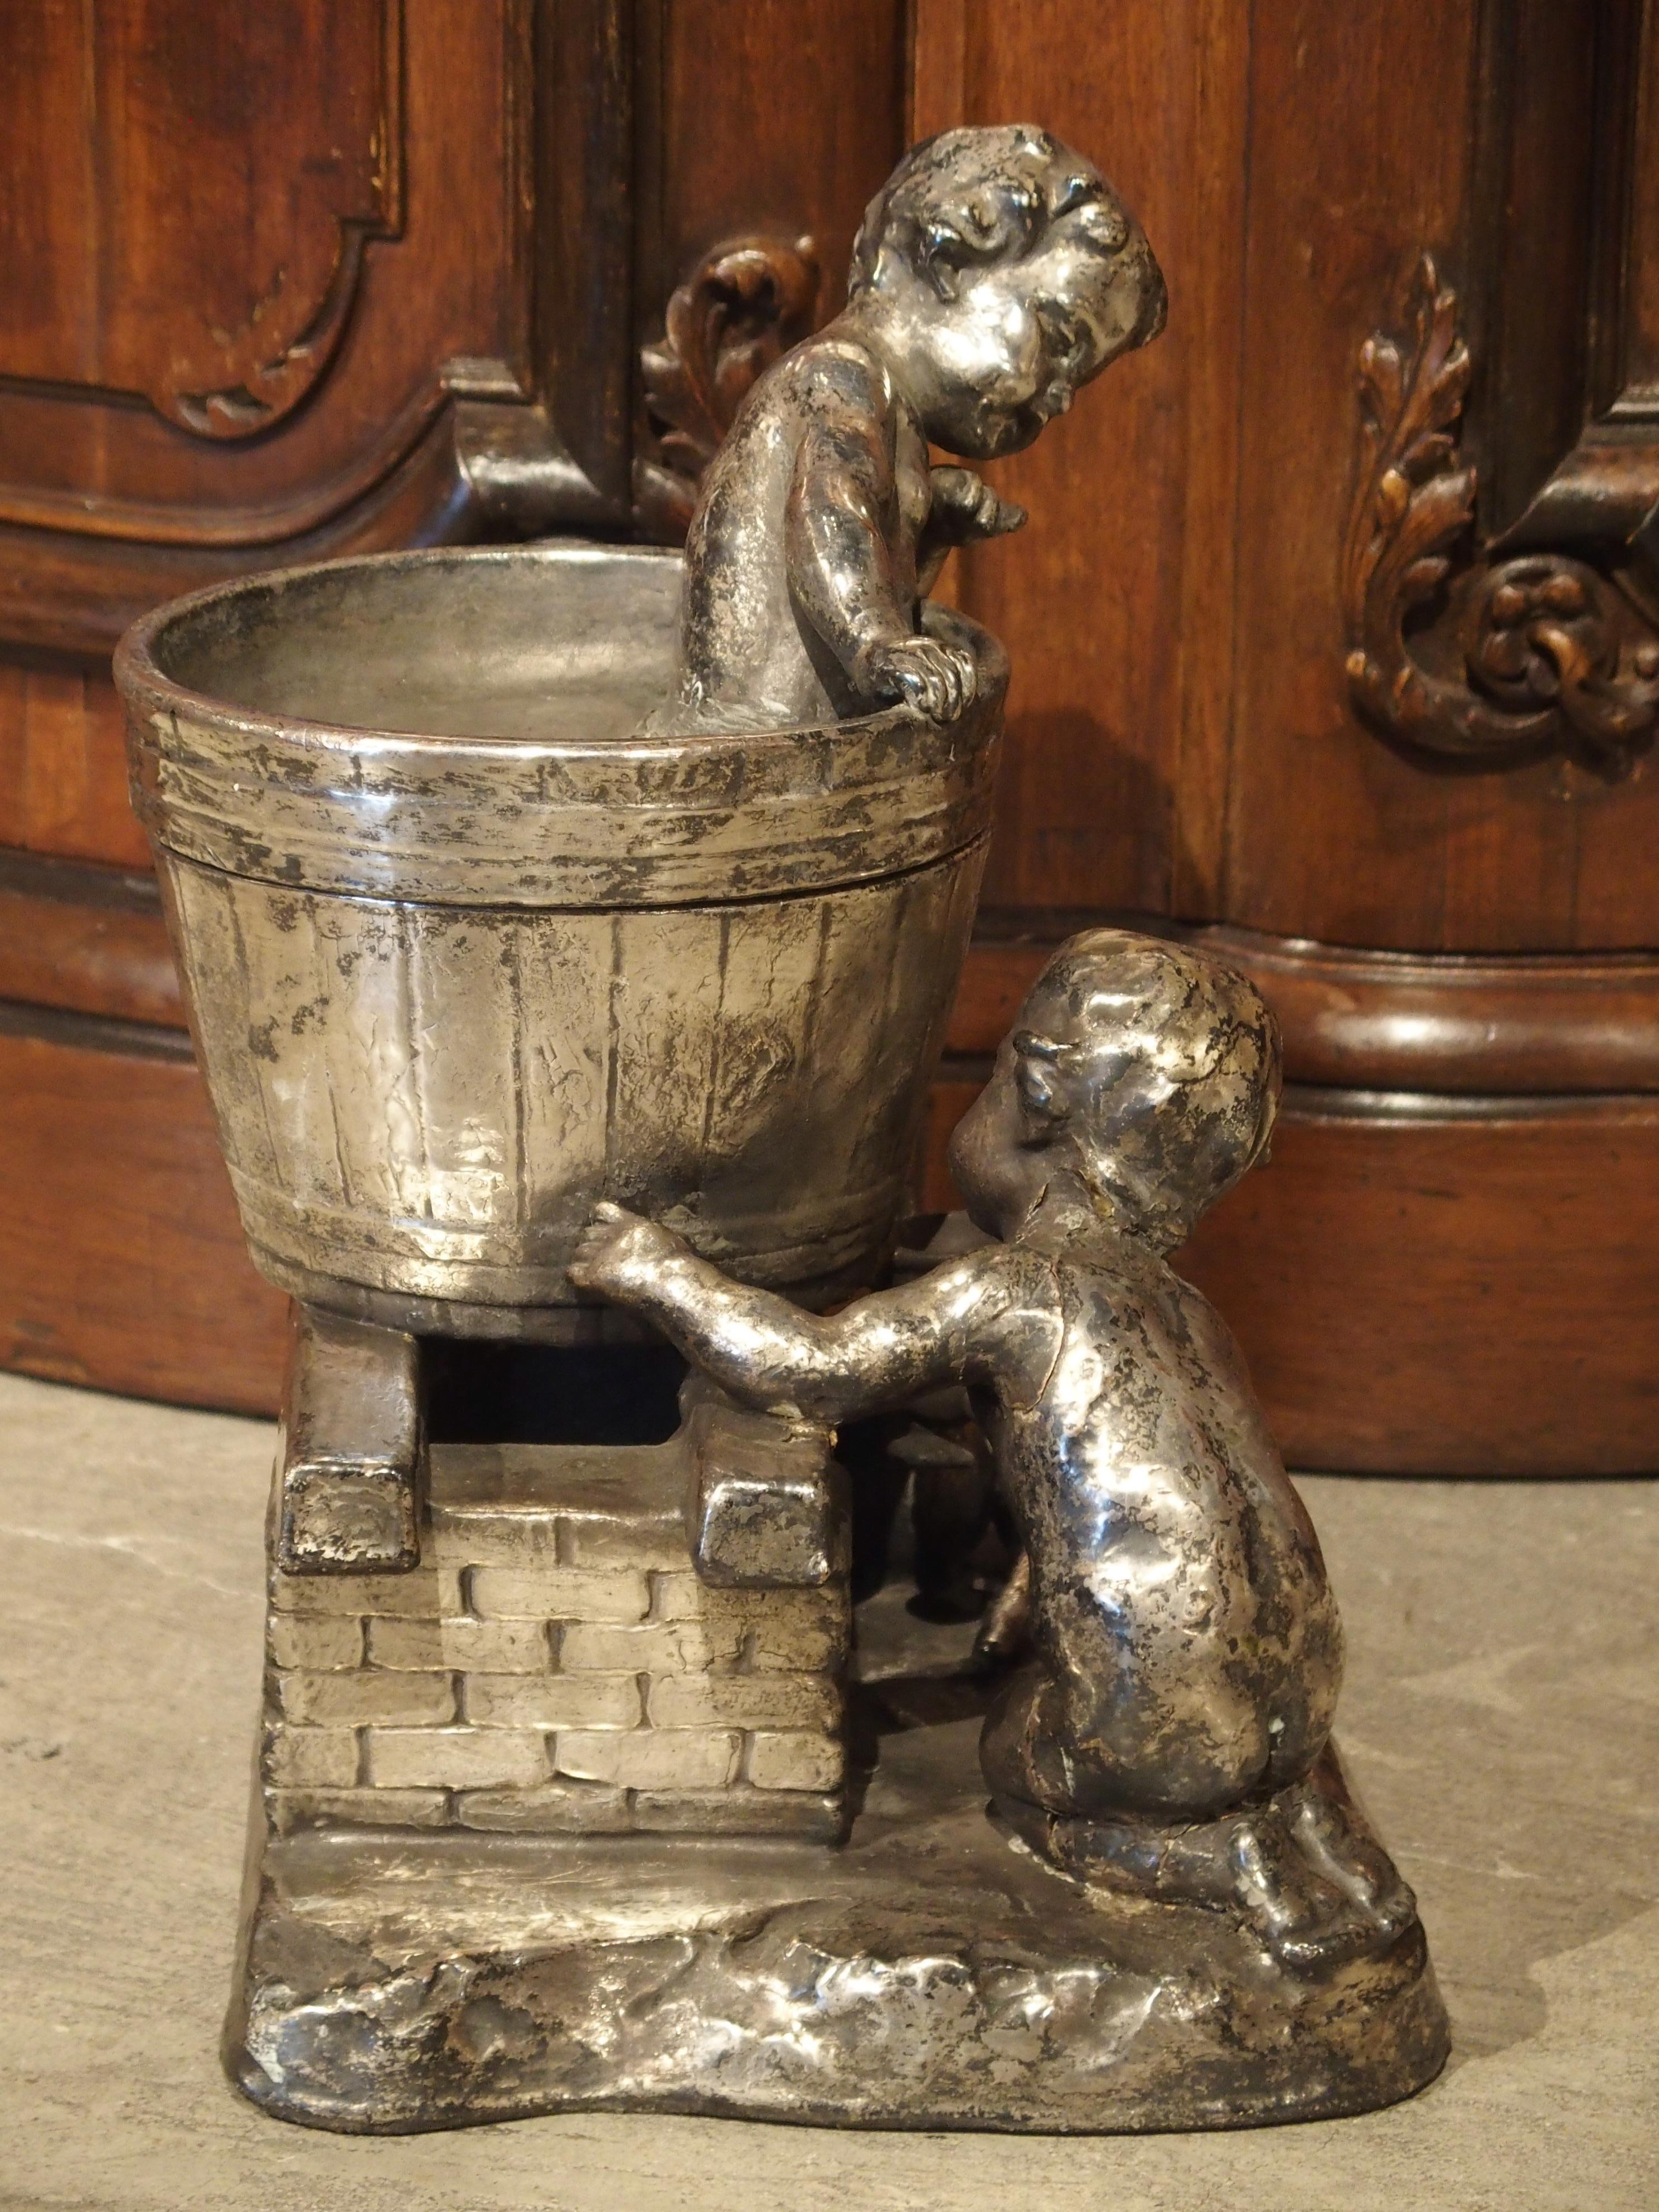 Early to Mid-1900s Plaster Putti Wine Sculpture/Container from France 1